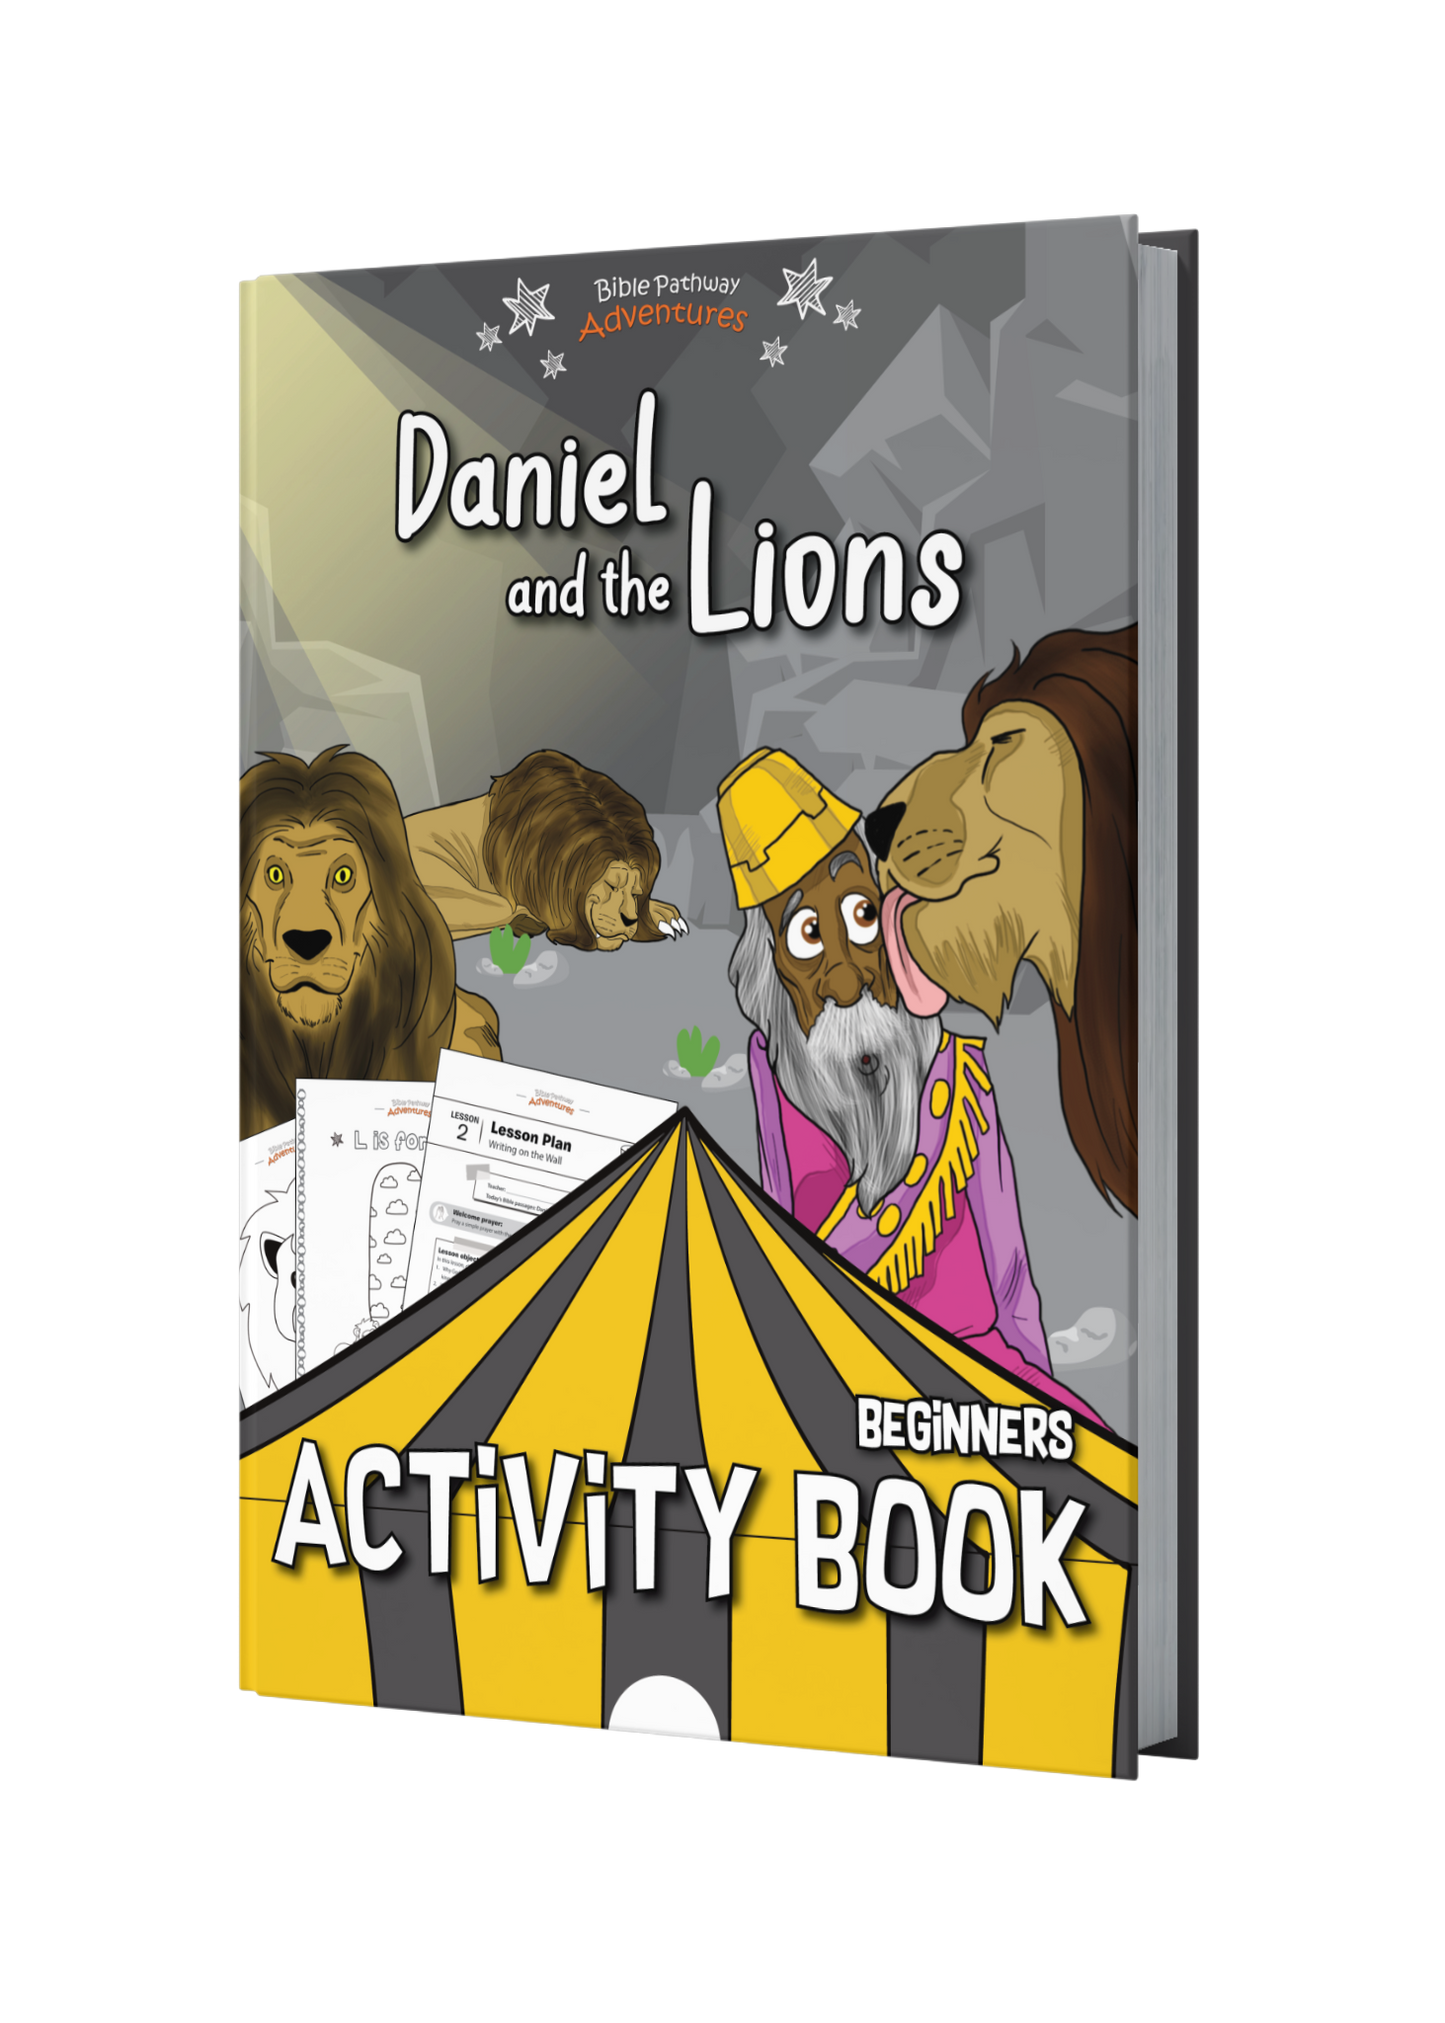 Daniel and the Lions Bible study book cover